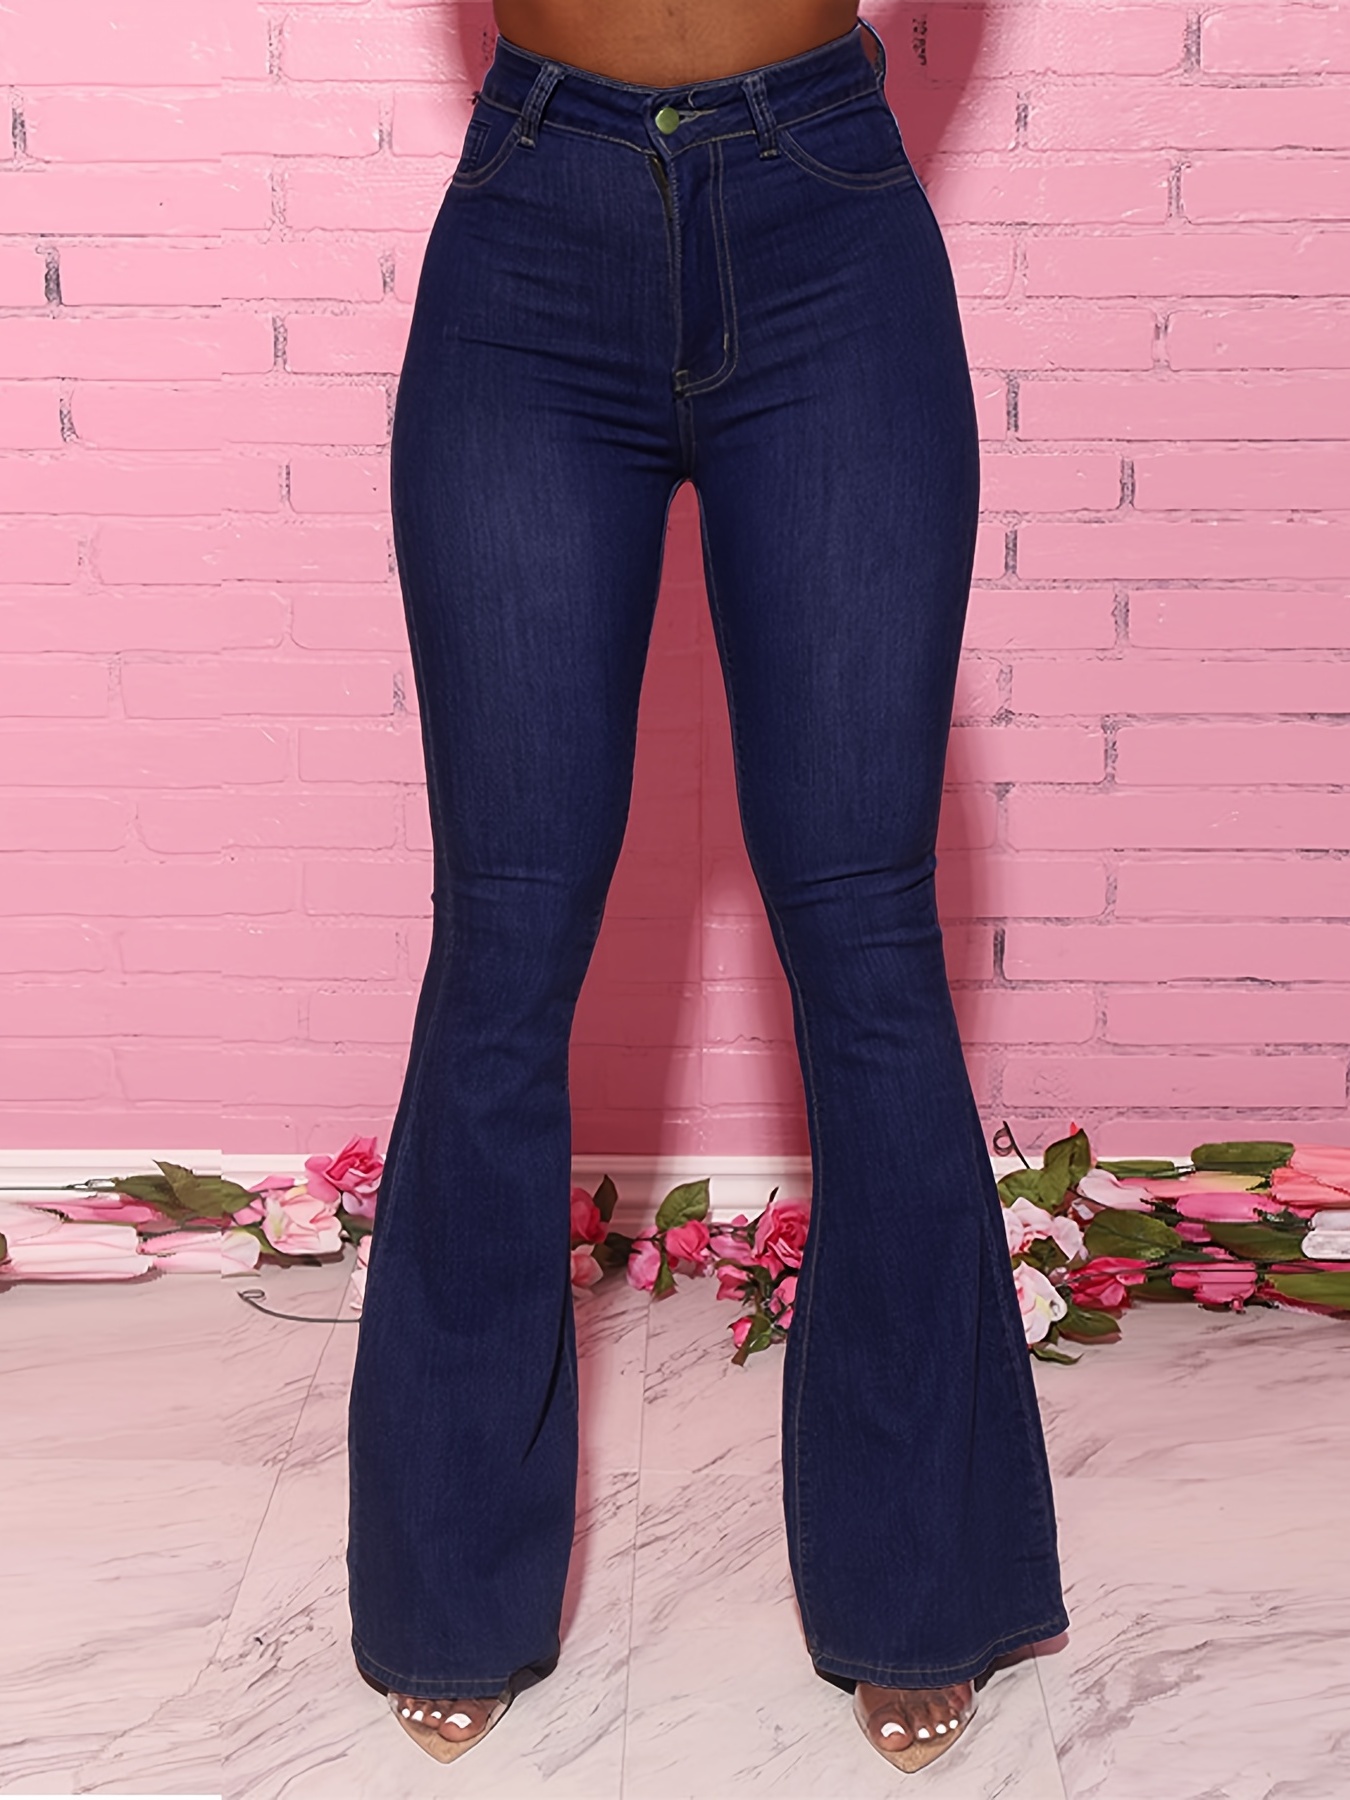 Plus Size Solid High * Flared Leg Jeans, Women's Plus Medium Stretch Bell  Bottom Jeans